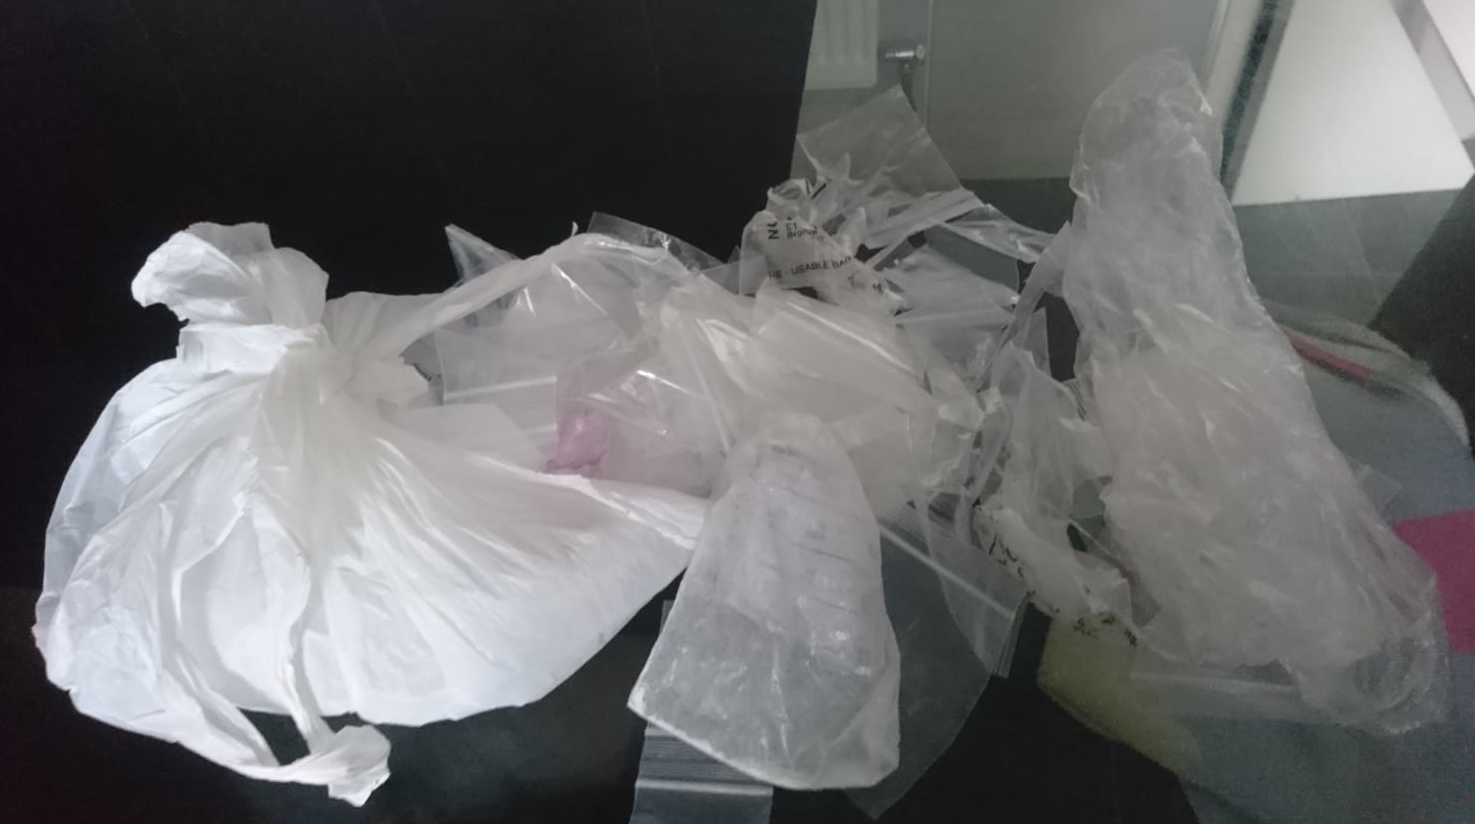 FIND: The large amount of drugs destroyed by the IRSP – several other bags that had formerly contained drugs can also be seen